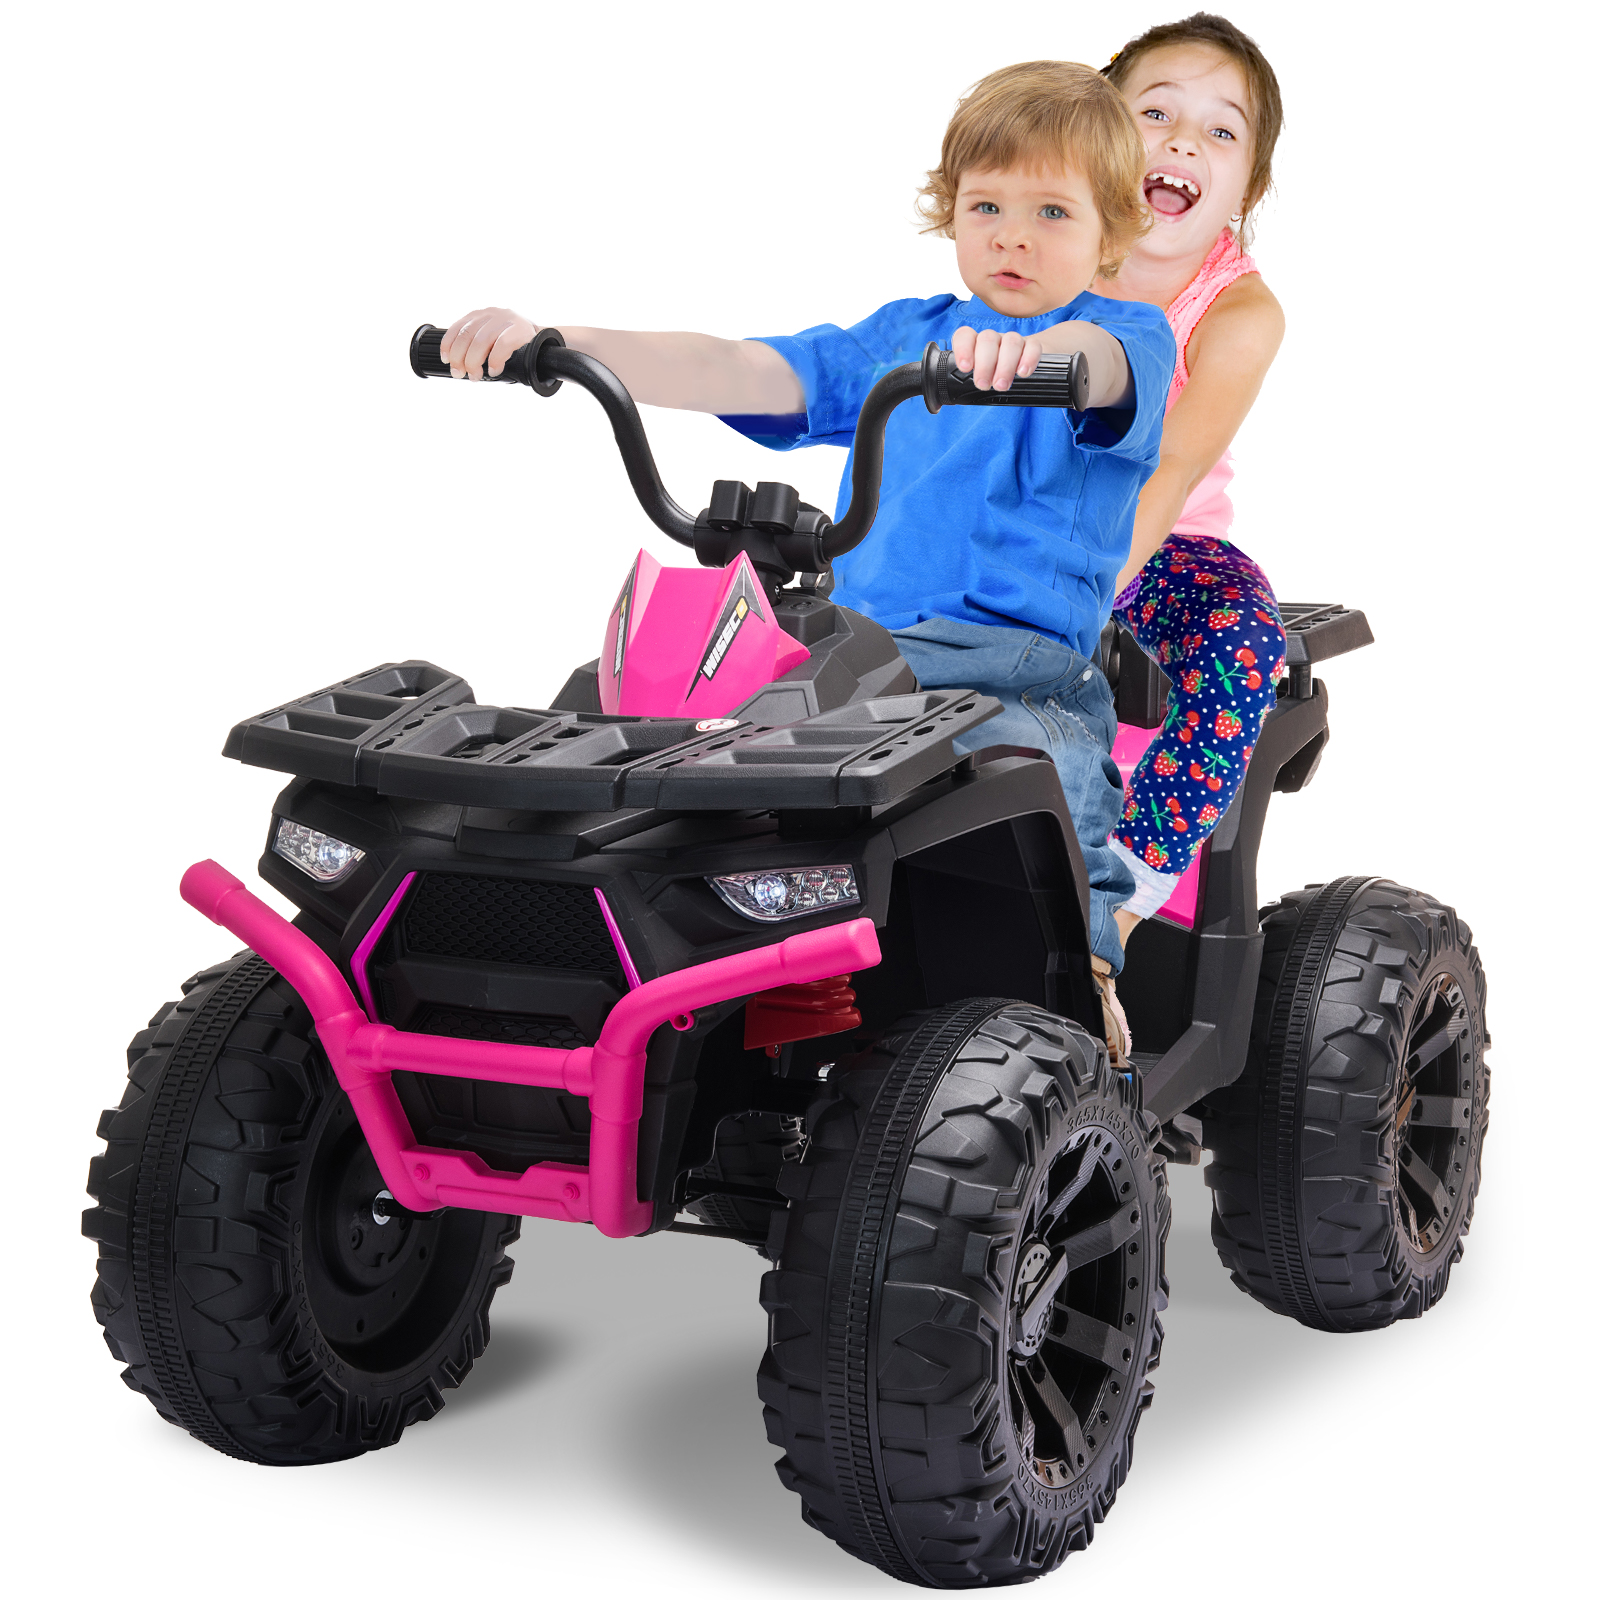 Joyracer 24V Kids Ride on ATV with 2 Seater, 2* 200W Motor 9AH Battery Powered Electric Car w/ LED Lights, High & Low Speed, Music, Suspension, Ride on Toy 4 Wheeler Quad for Boys Girls, Rose Red - image 2 of 11